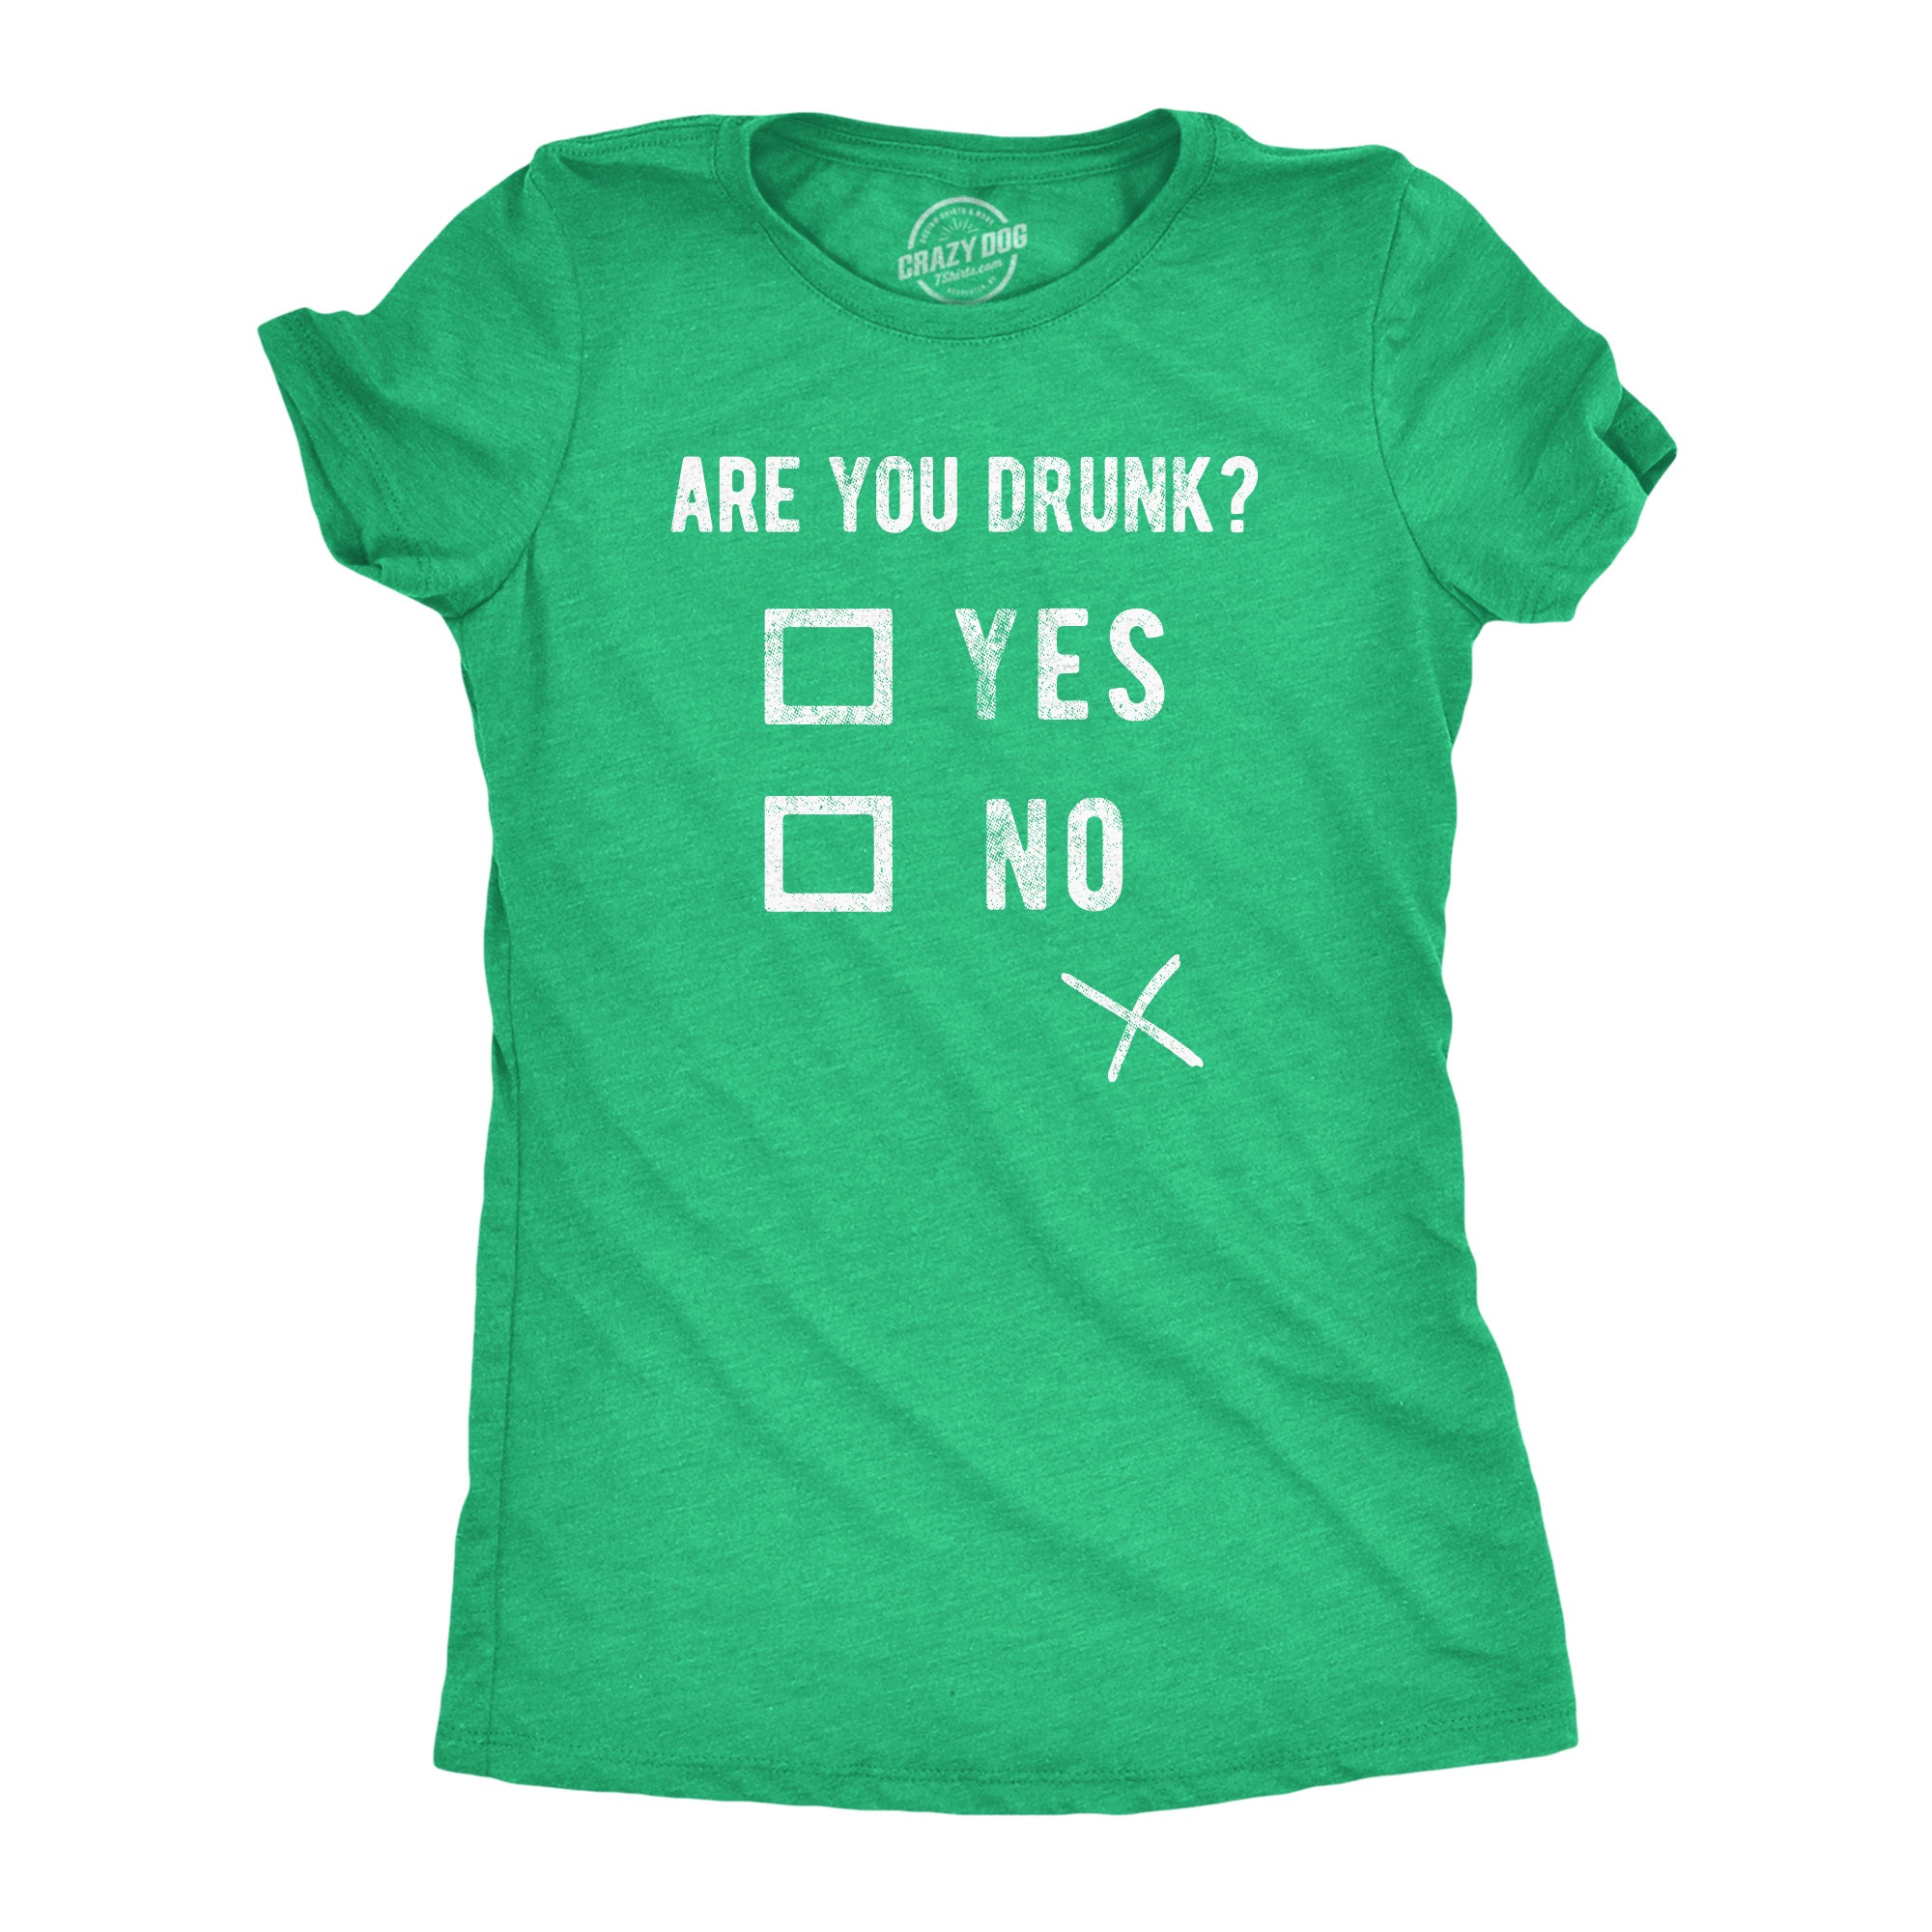 Funny Heather Green - Are You Drunk Are You Drunk Womens T Shirt Nerdy Saint Patrick's Day Drinking Tee